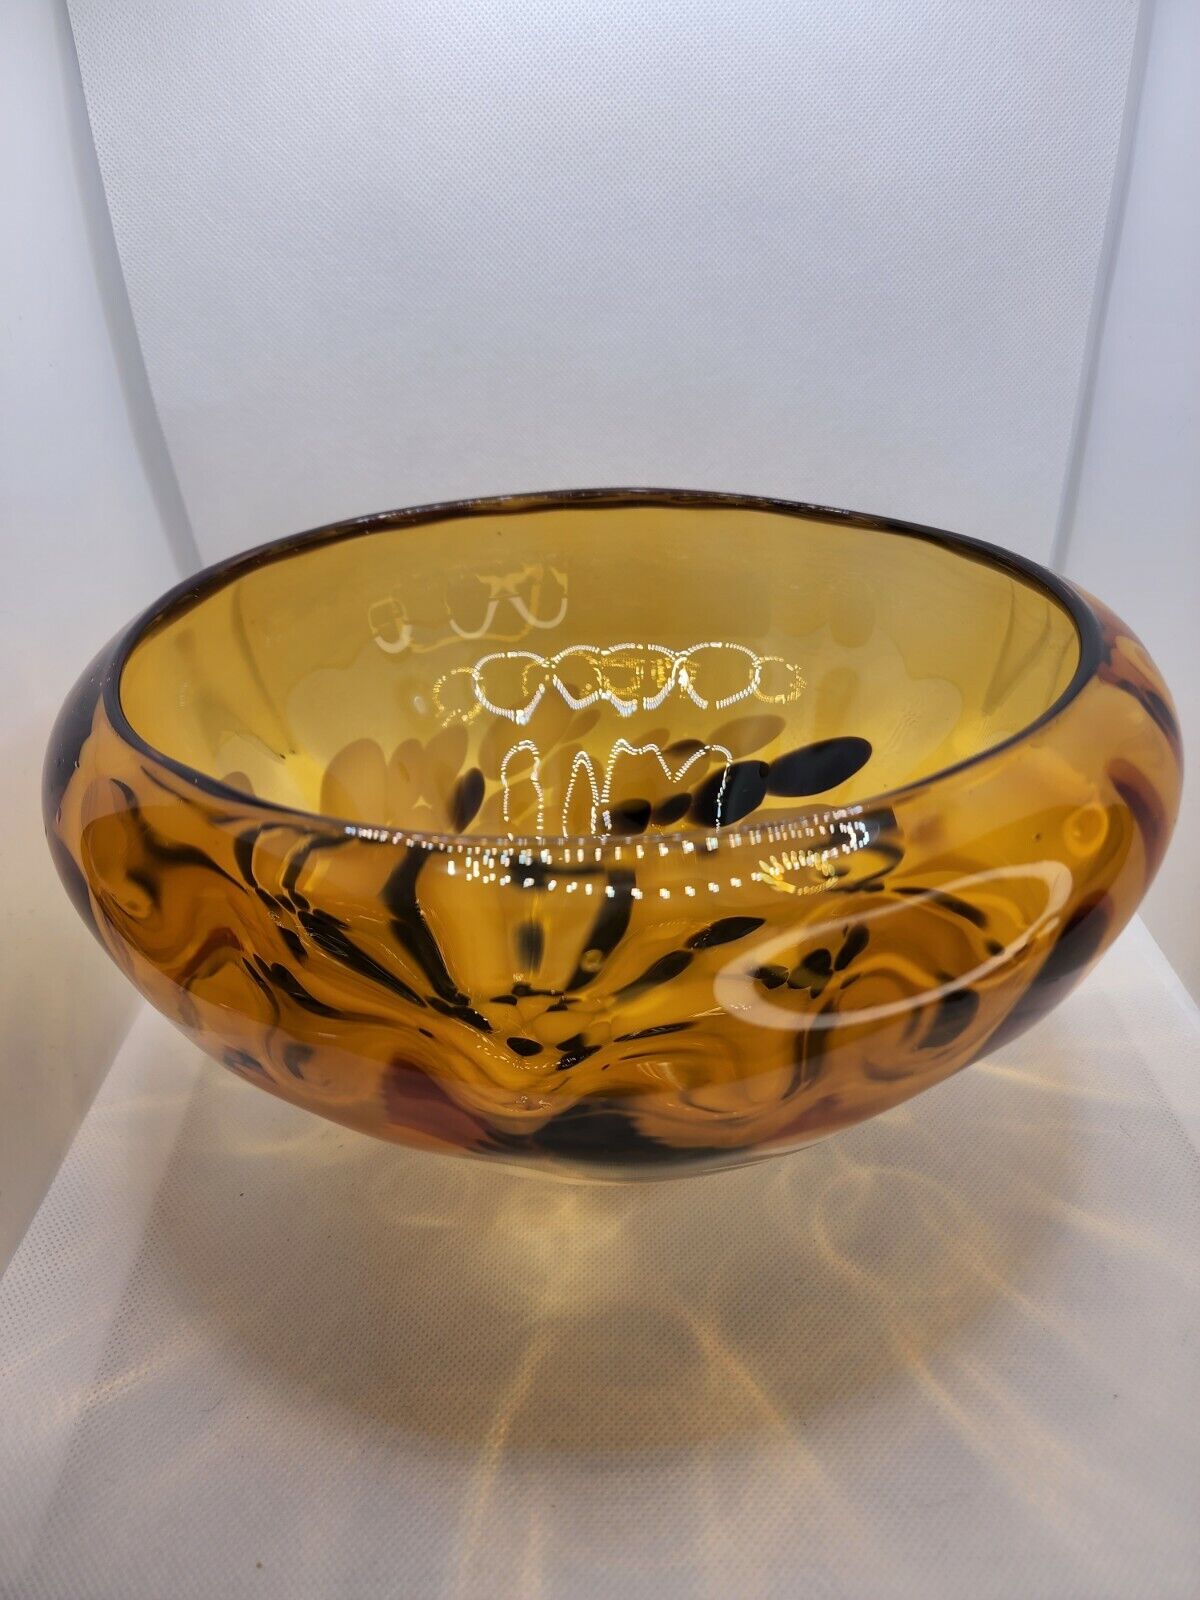 Large Vintage Handblown Tortoise Shell Amber Bowl With Brown & White Spots 